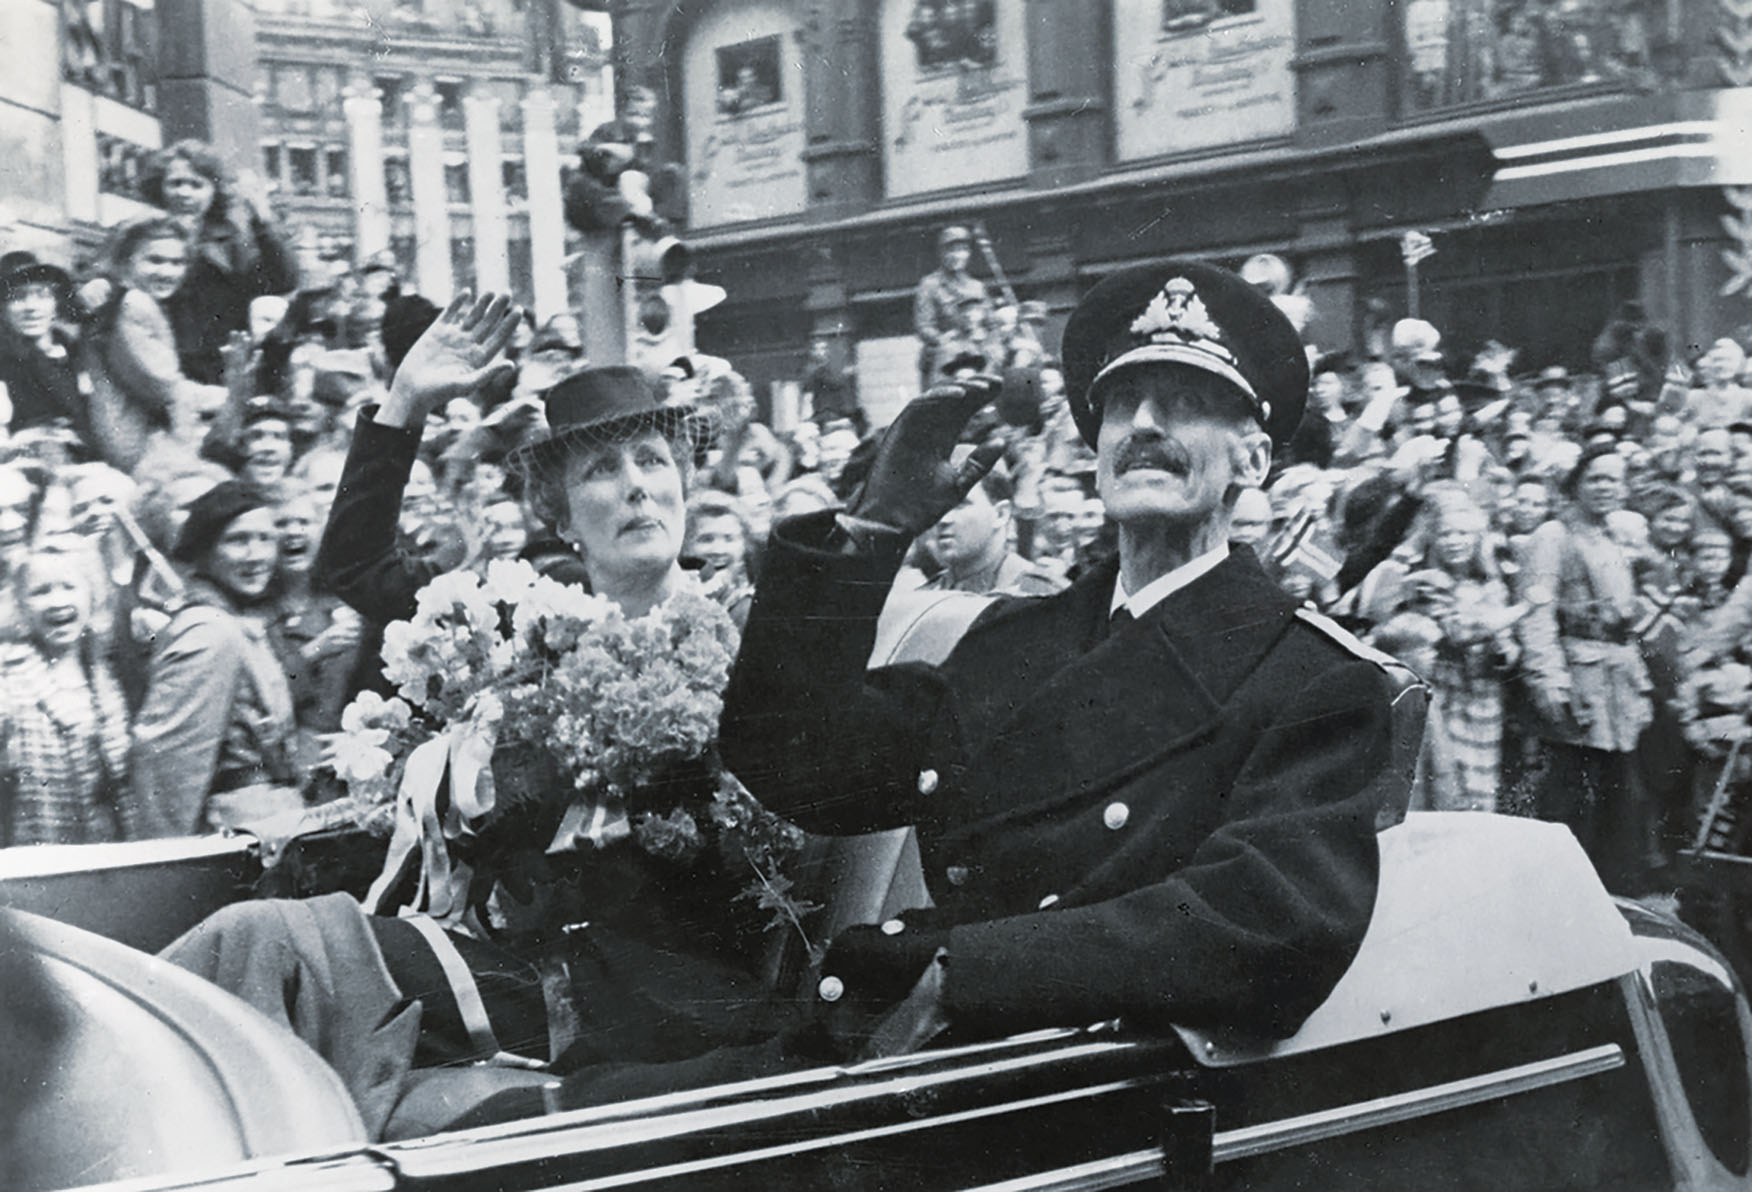 King Haakon VII returns to Oslo from Britain in June 1945. Soon after he awarded Steinbeck the Freedom Cross for wartime achievement. / Oslo Museum